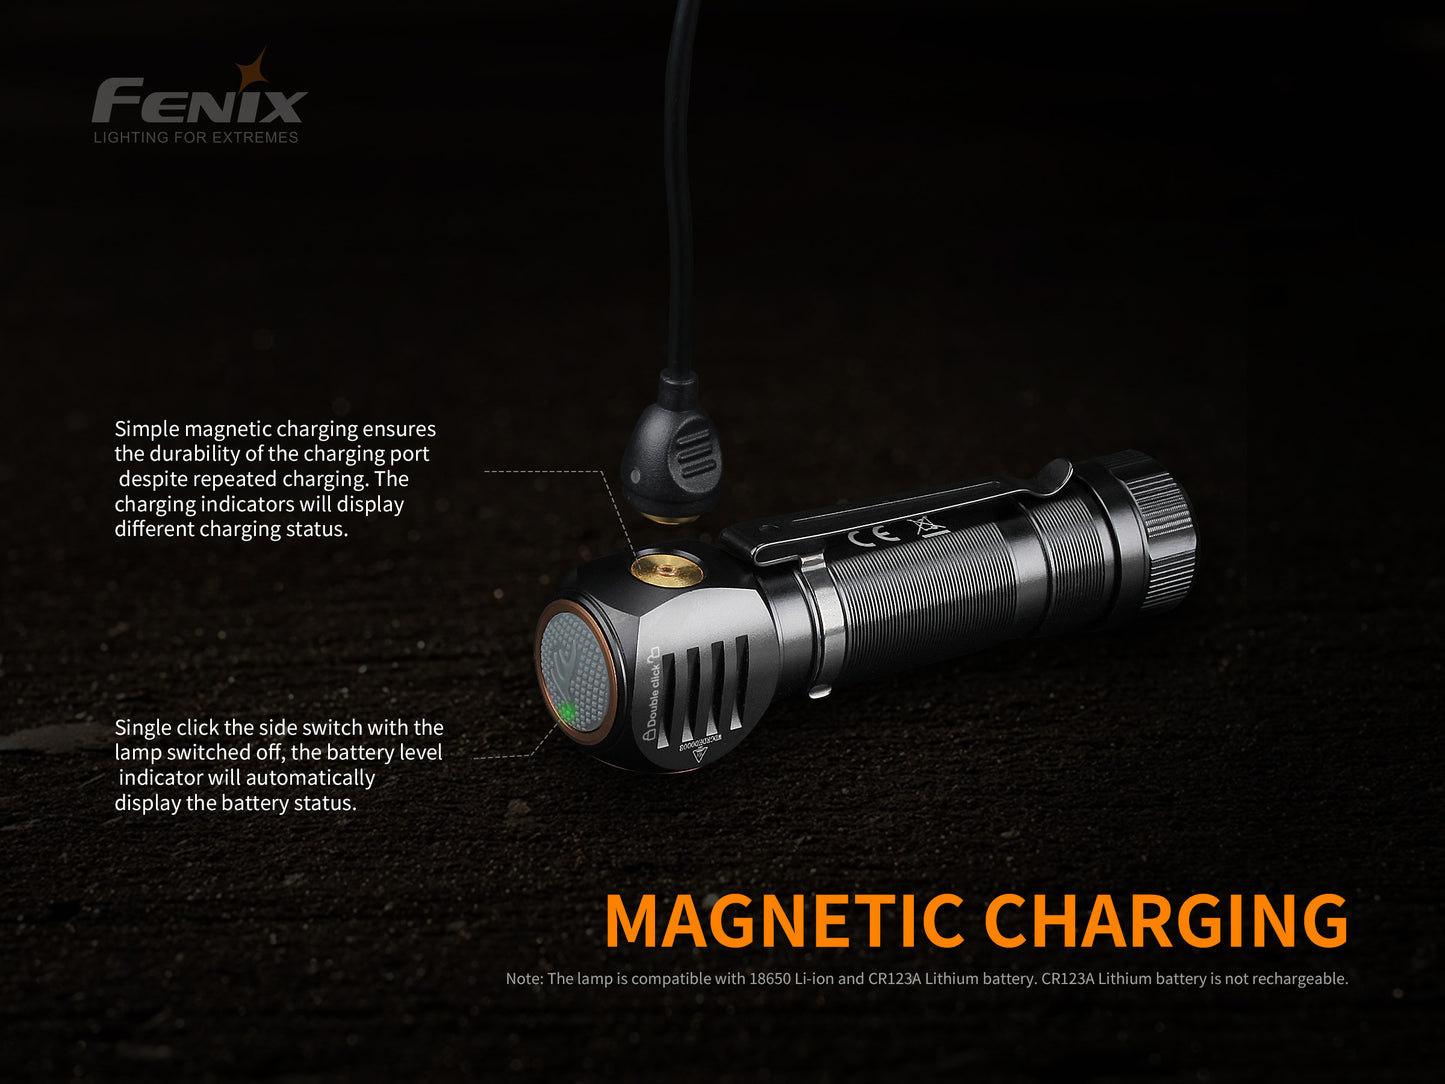 Fenix HM61R Right Angle Flashlight with Headlamp Feature